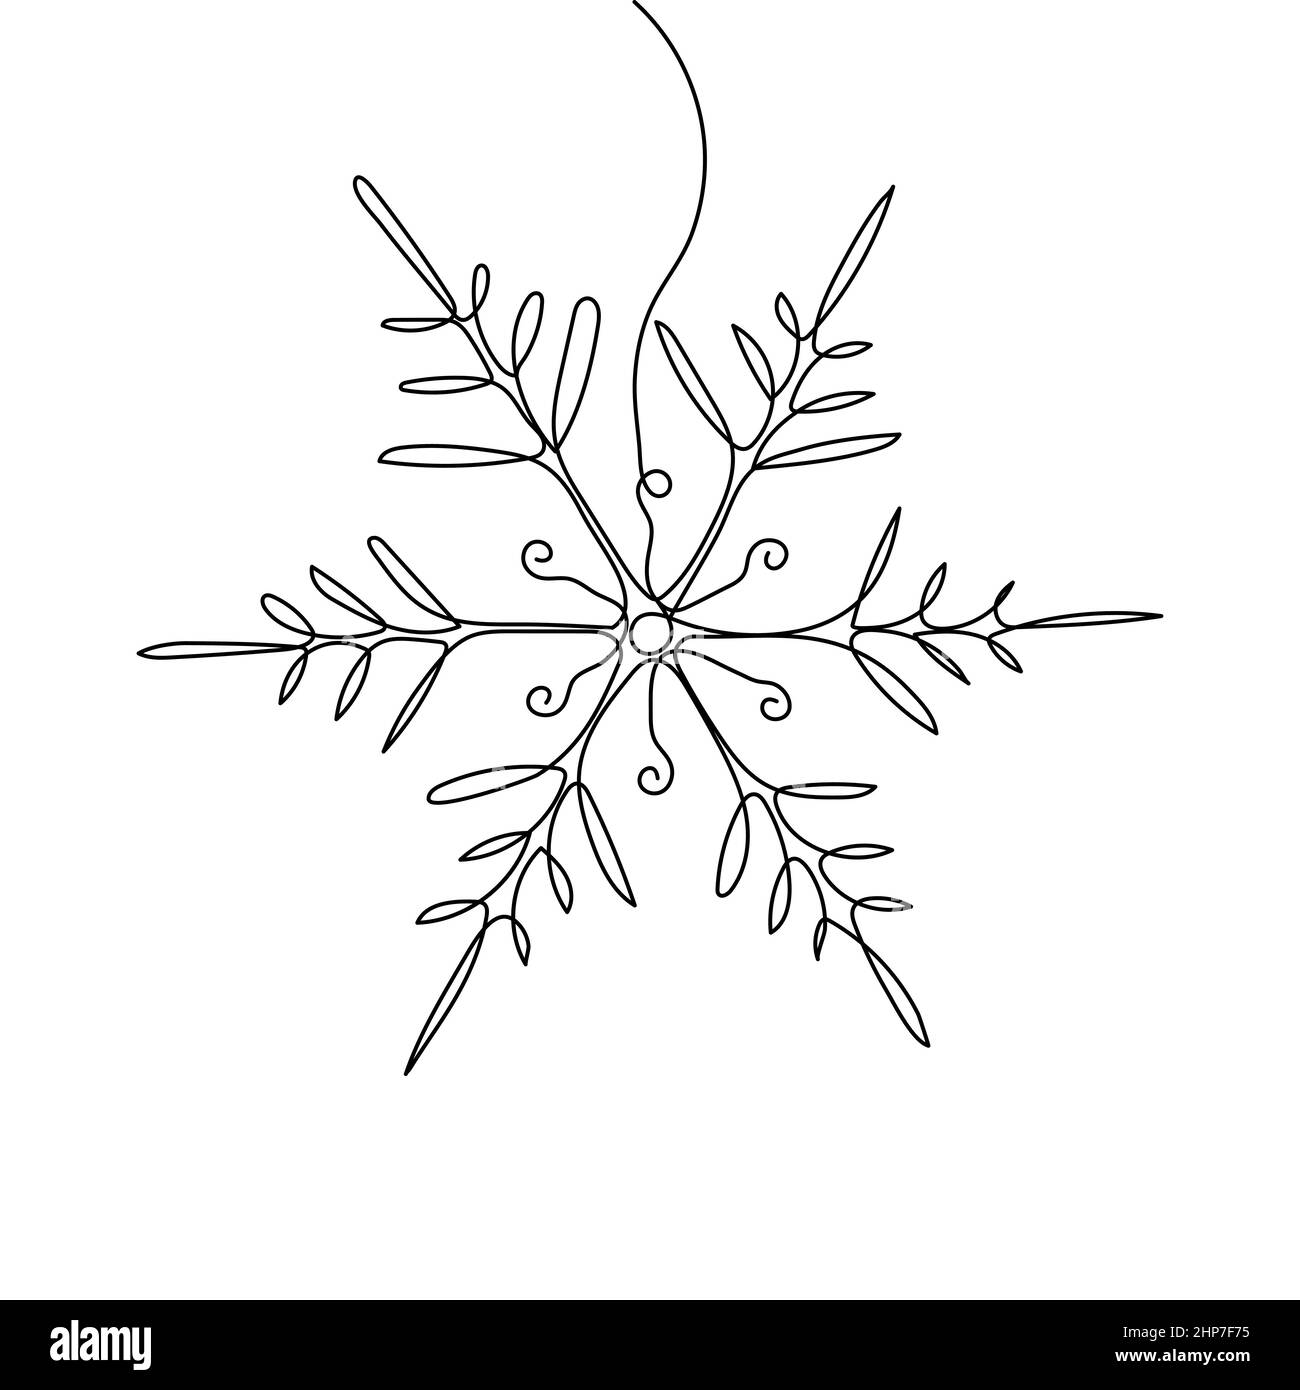 Continuous one-line drawing of a snowflake. New Years celebration concept isolated on white background. Vector sketch illustration Stock Vector